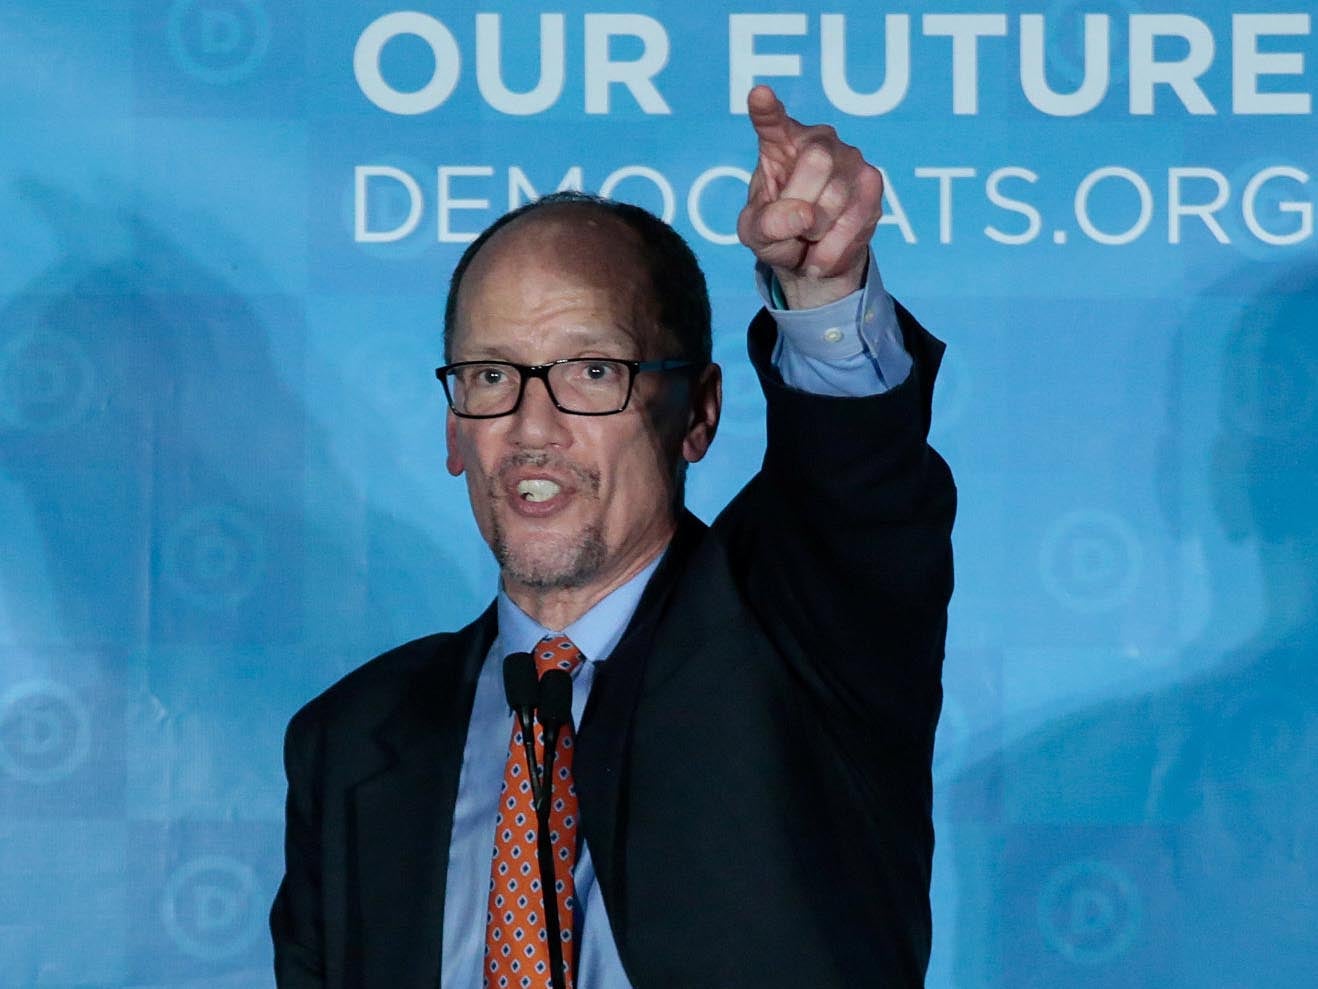 Tom Perez was elected Democratic National Chair